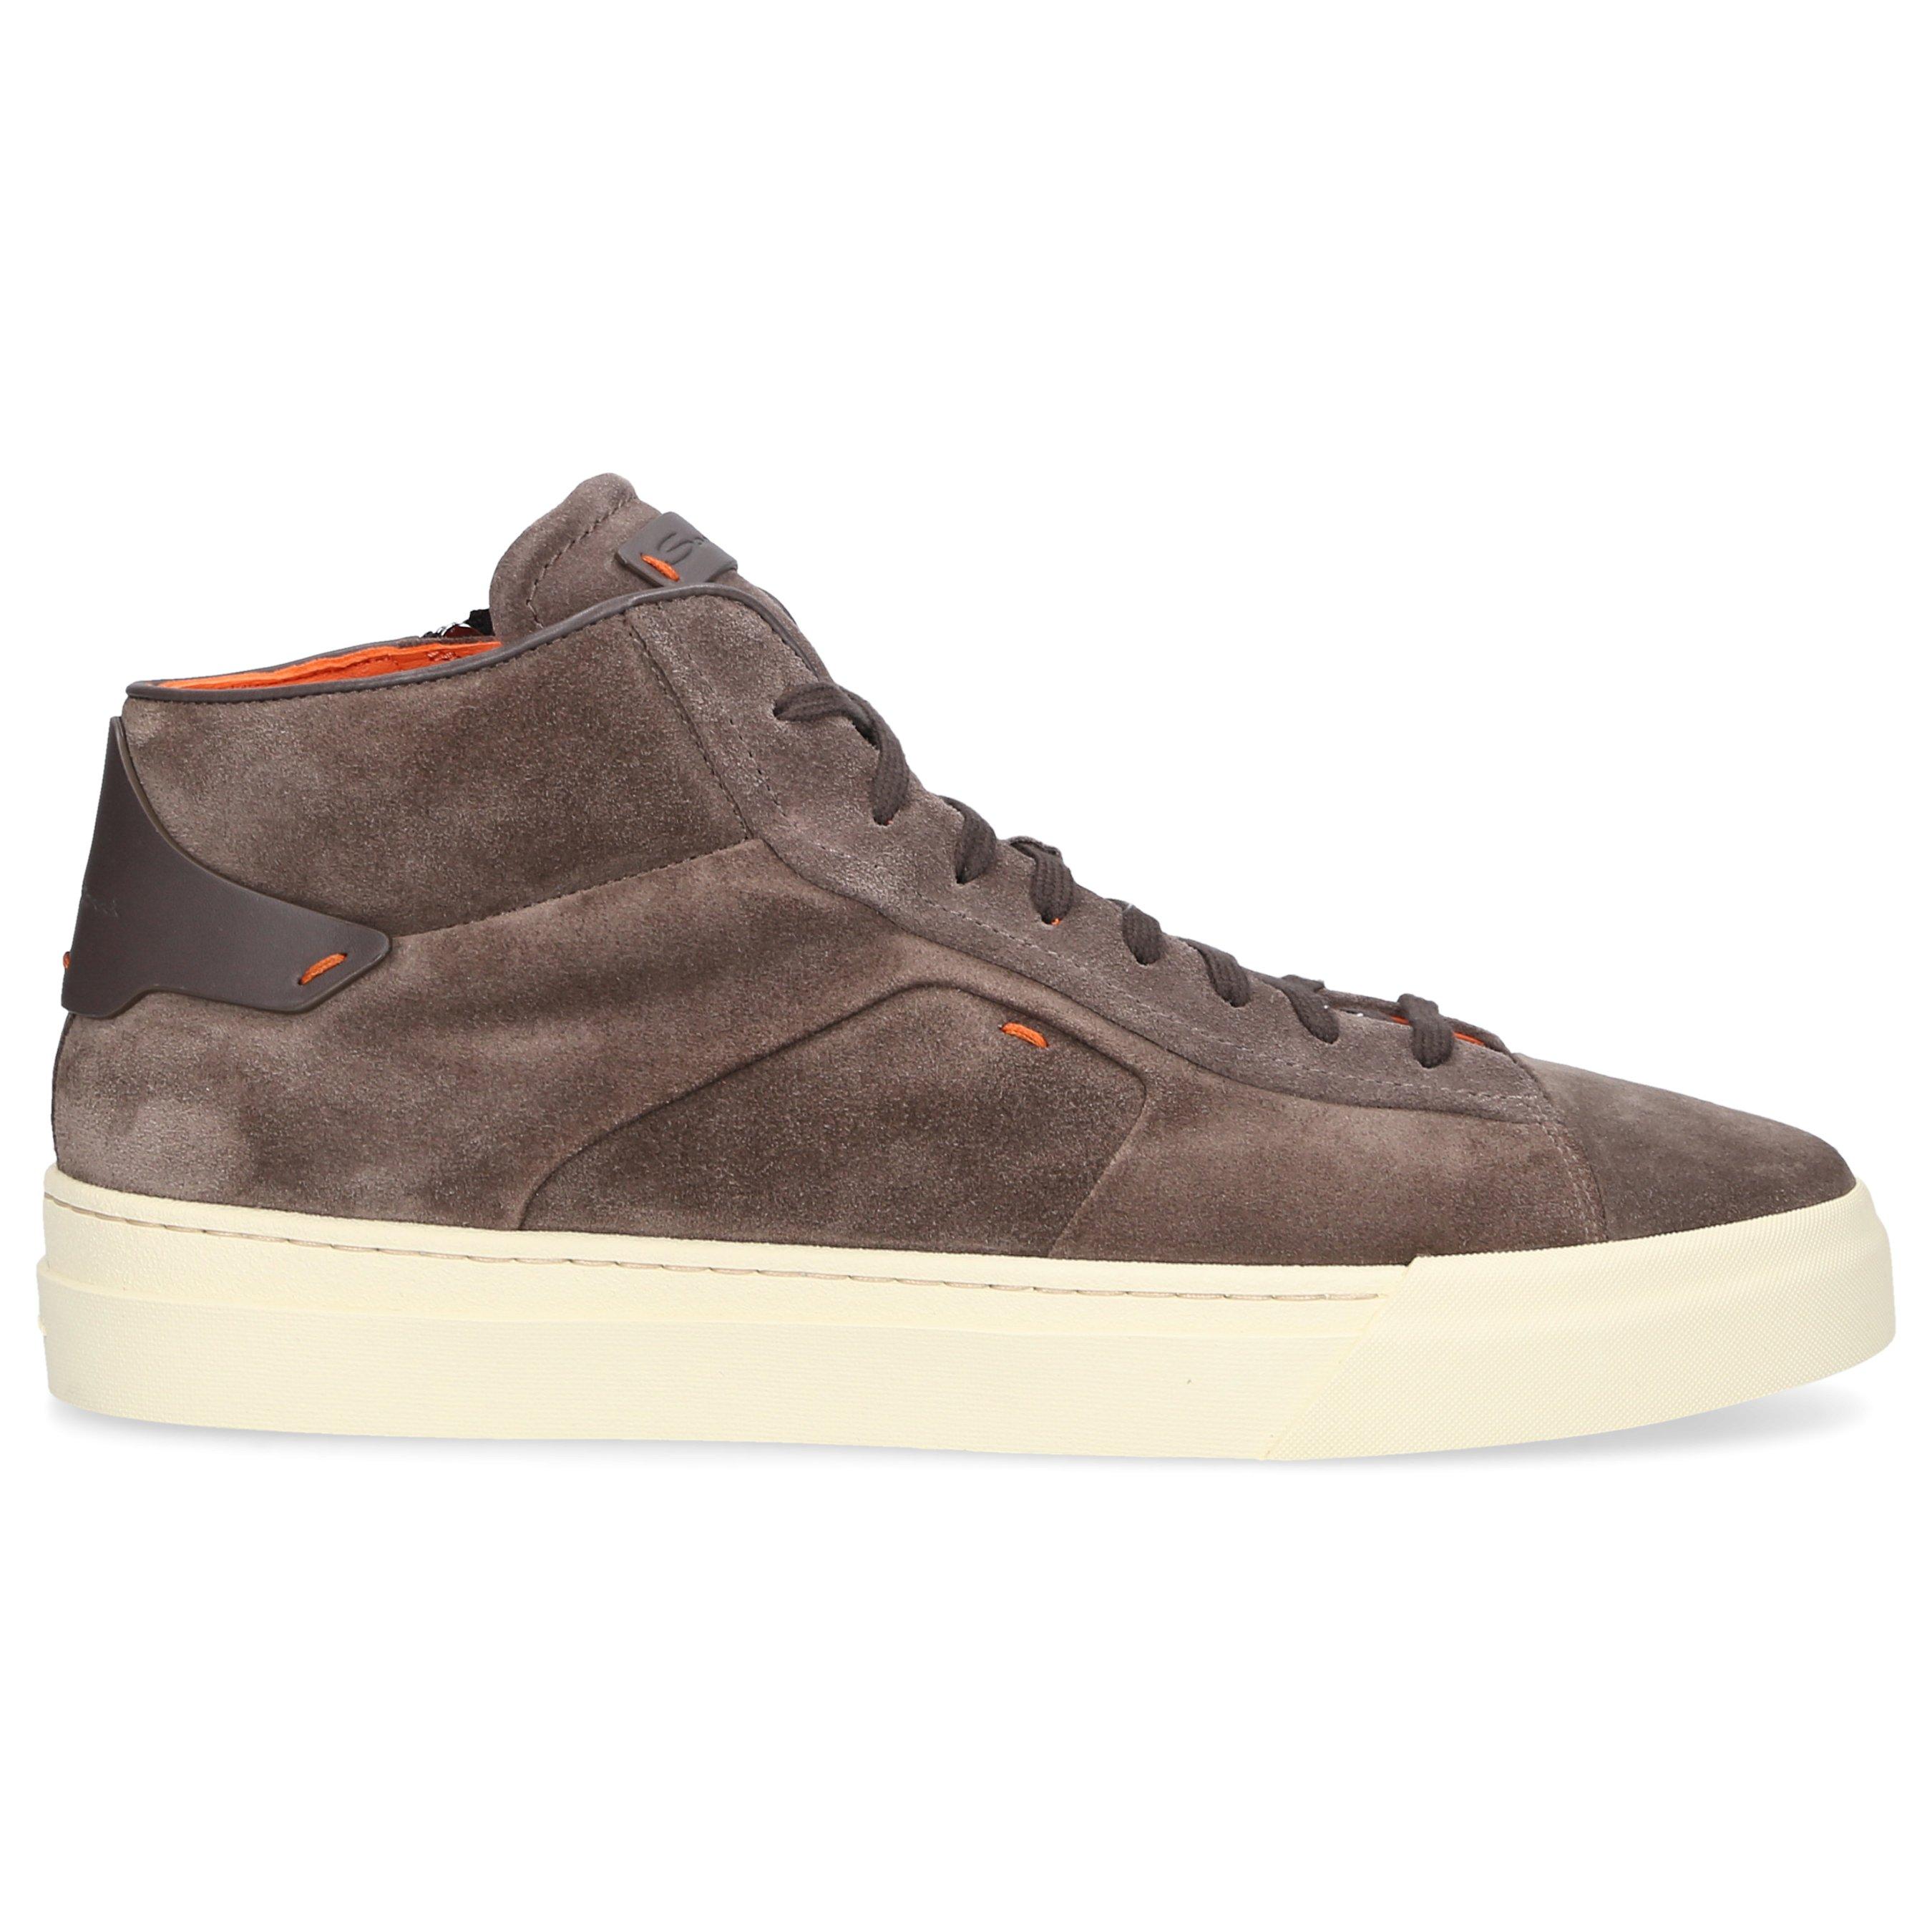 Santoni Sneakers Brown 21555 for Men Mens Shoes Trainers High-top trainers 